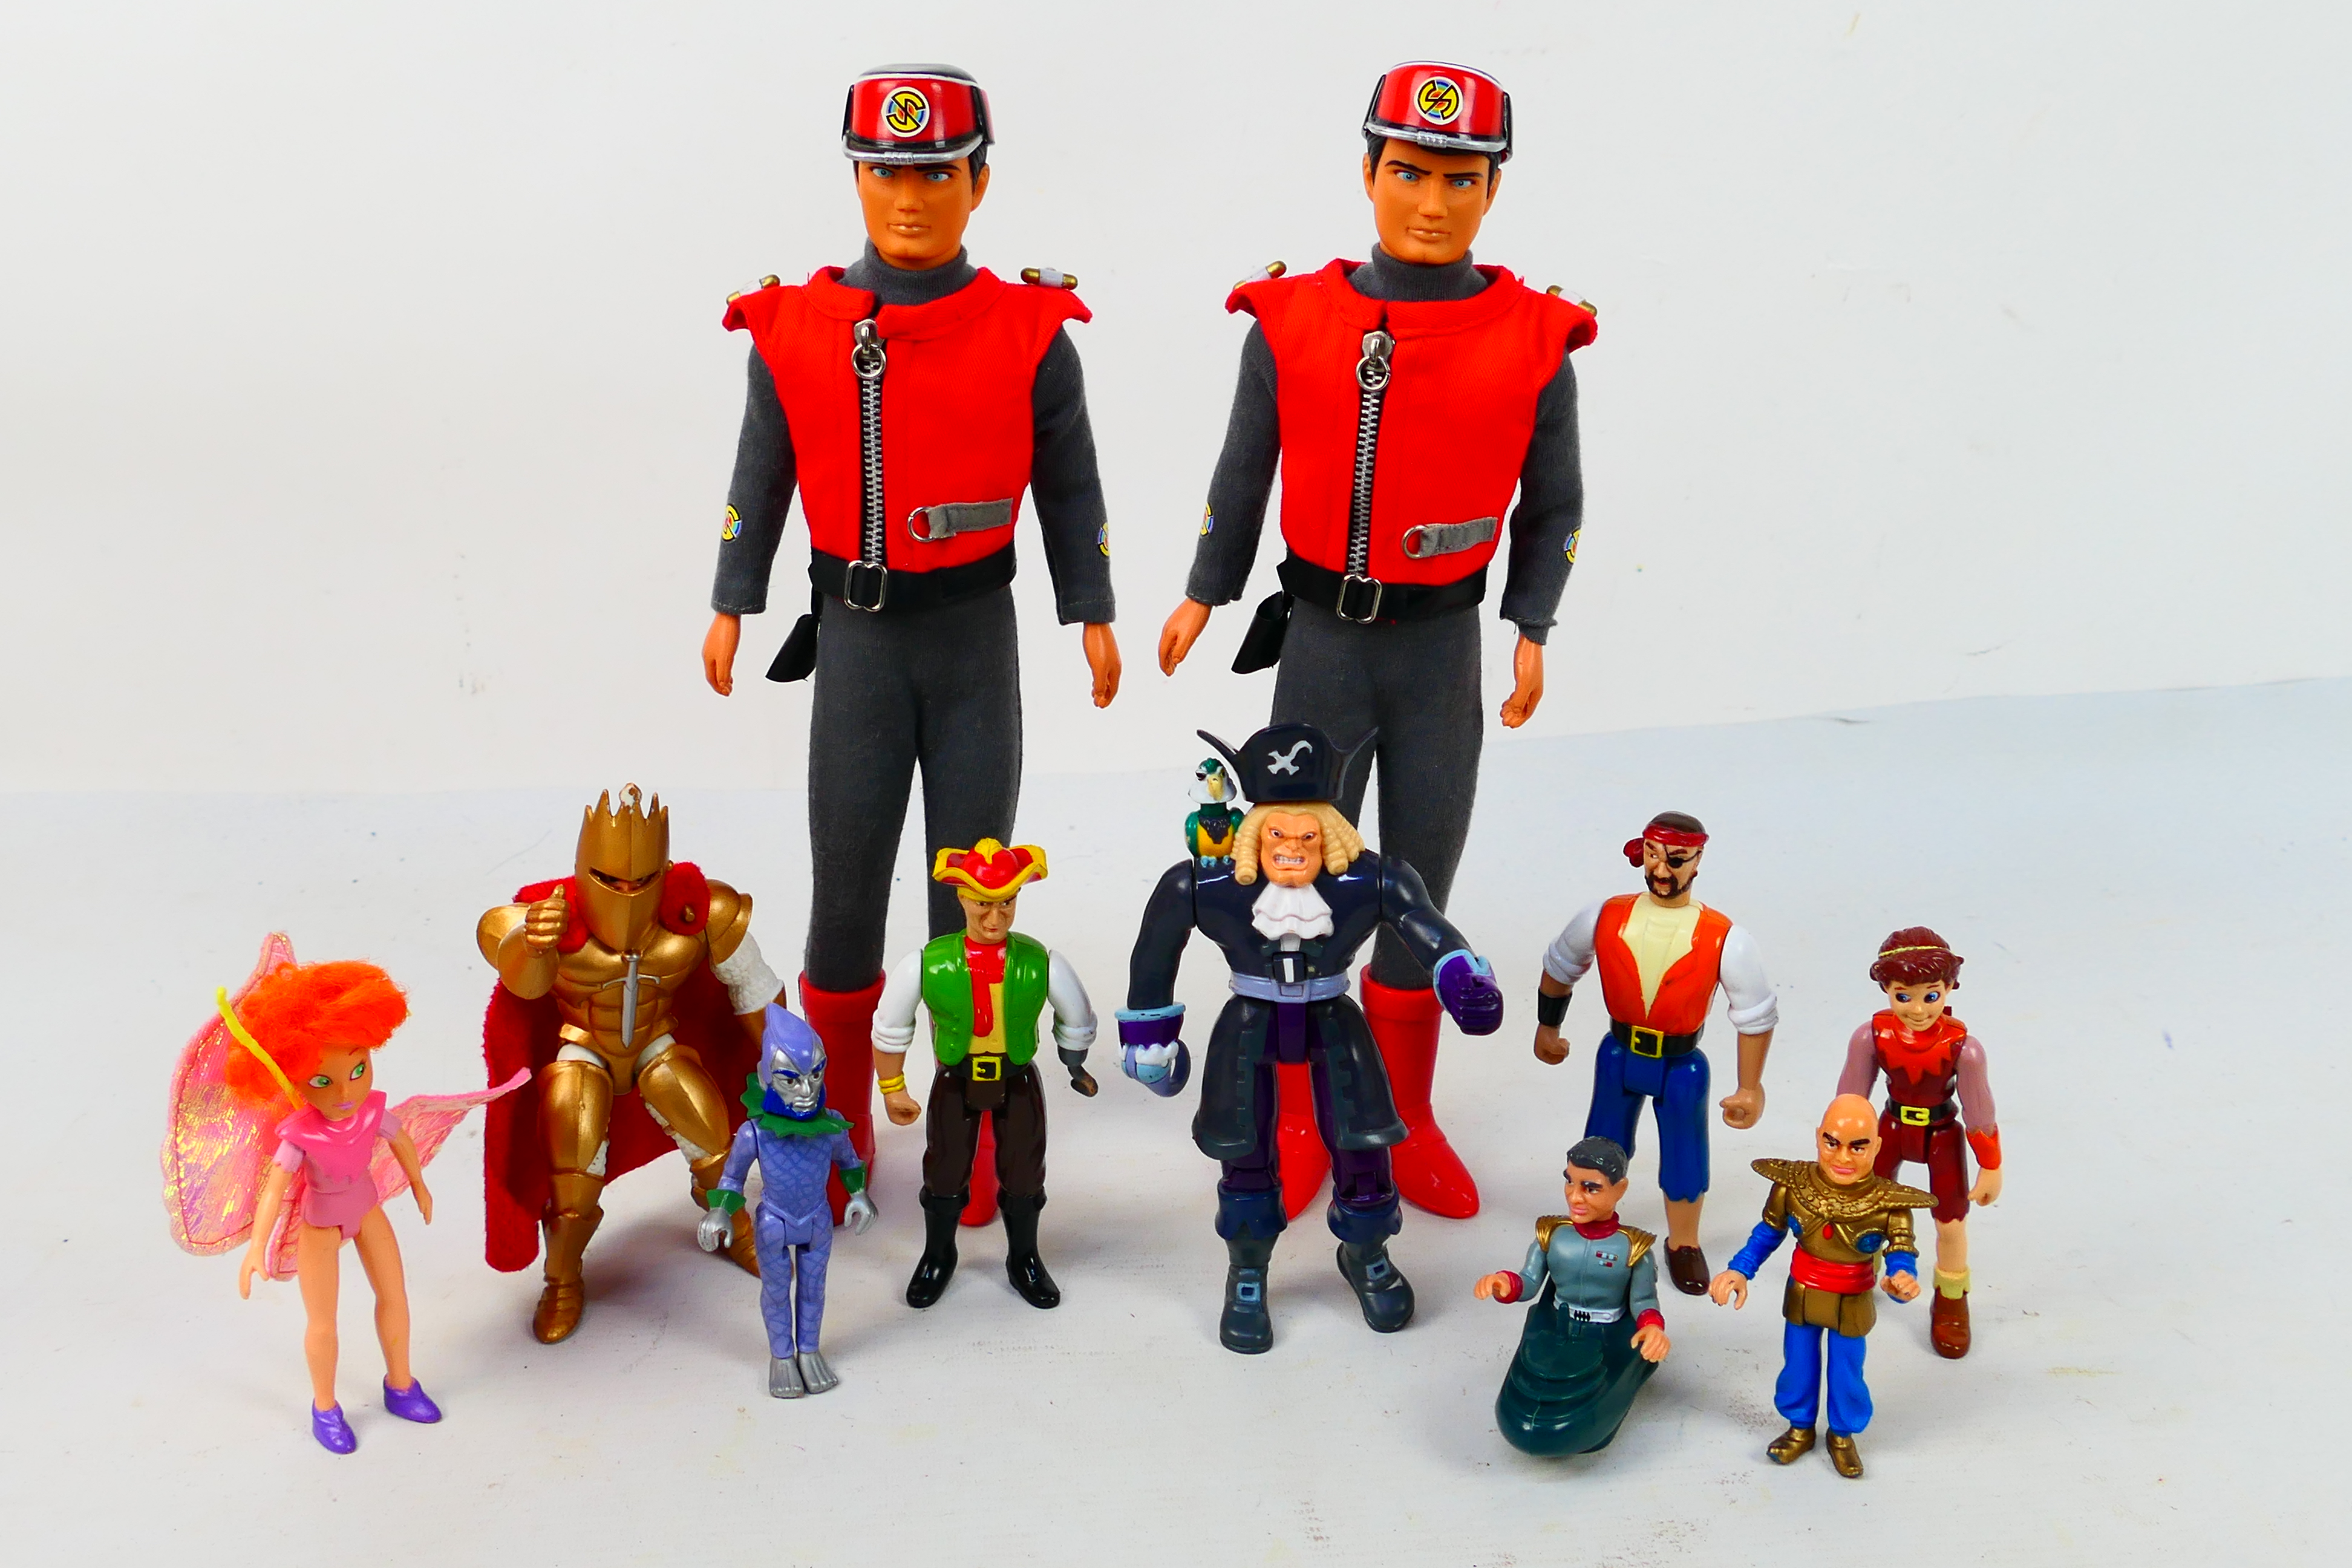 Captain Scarlet - Peter Pan - Pirates of the High Seas - Imperial - Vivid Imaginations.